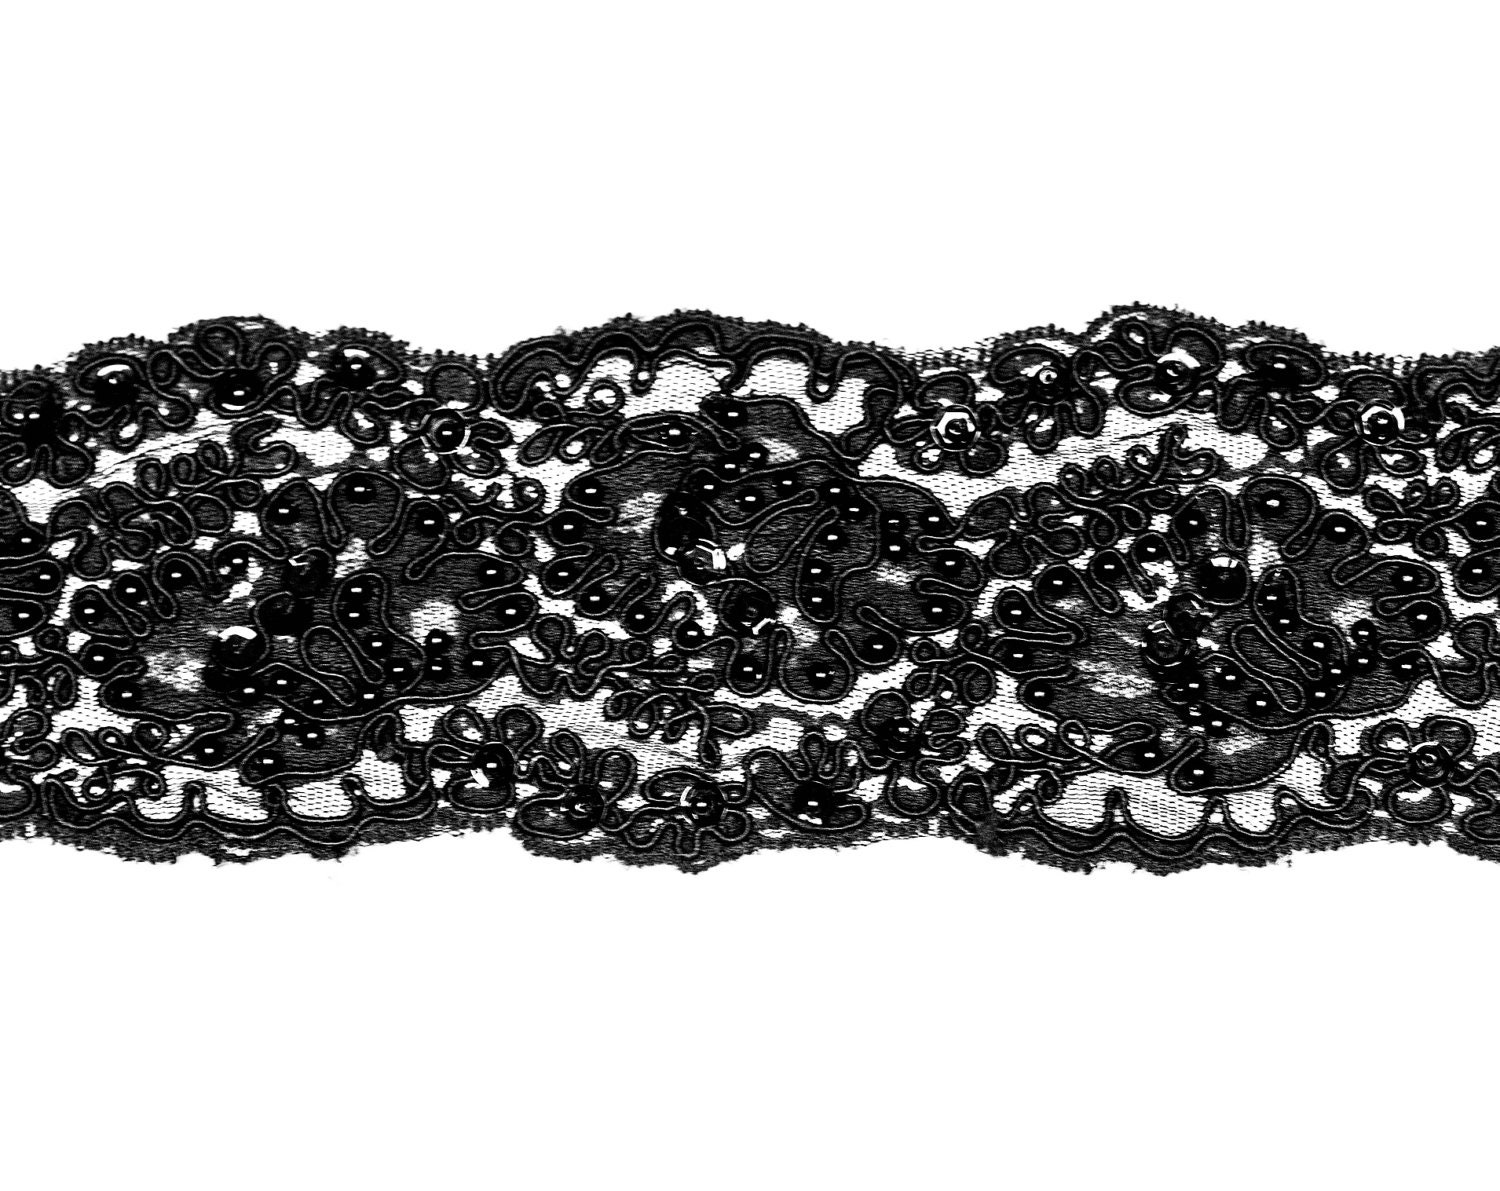 1 Yard Vintage Black Lace Trim. Embroidered Floral Design, AB Sequins and Black Pearl Tone Beads.  Item 0708 - CosmosCoolSupplies